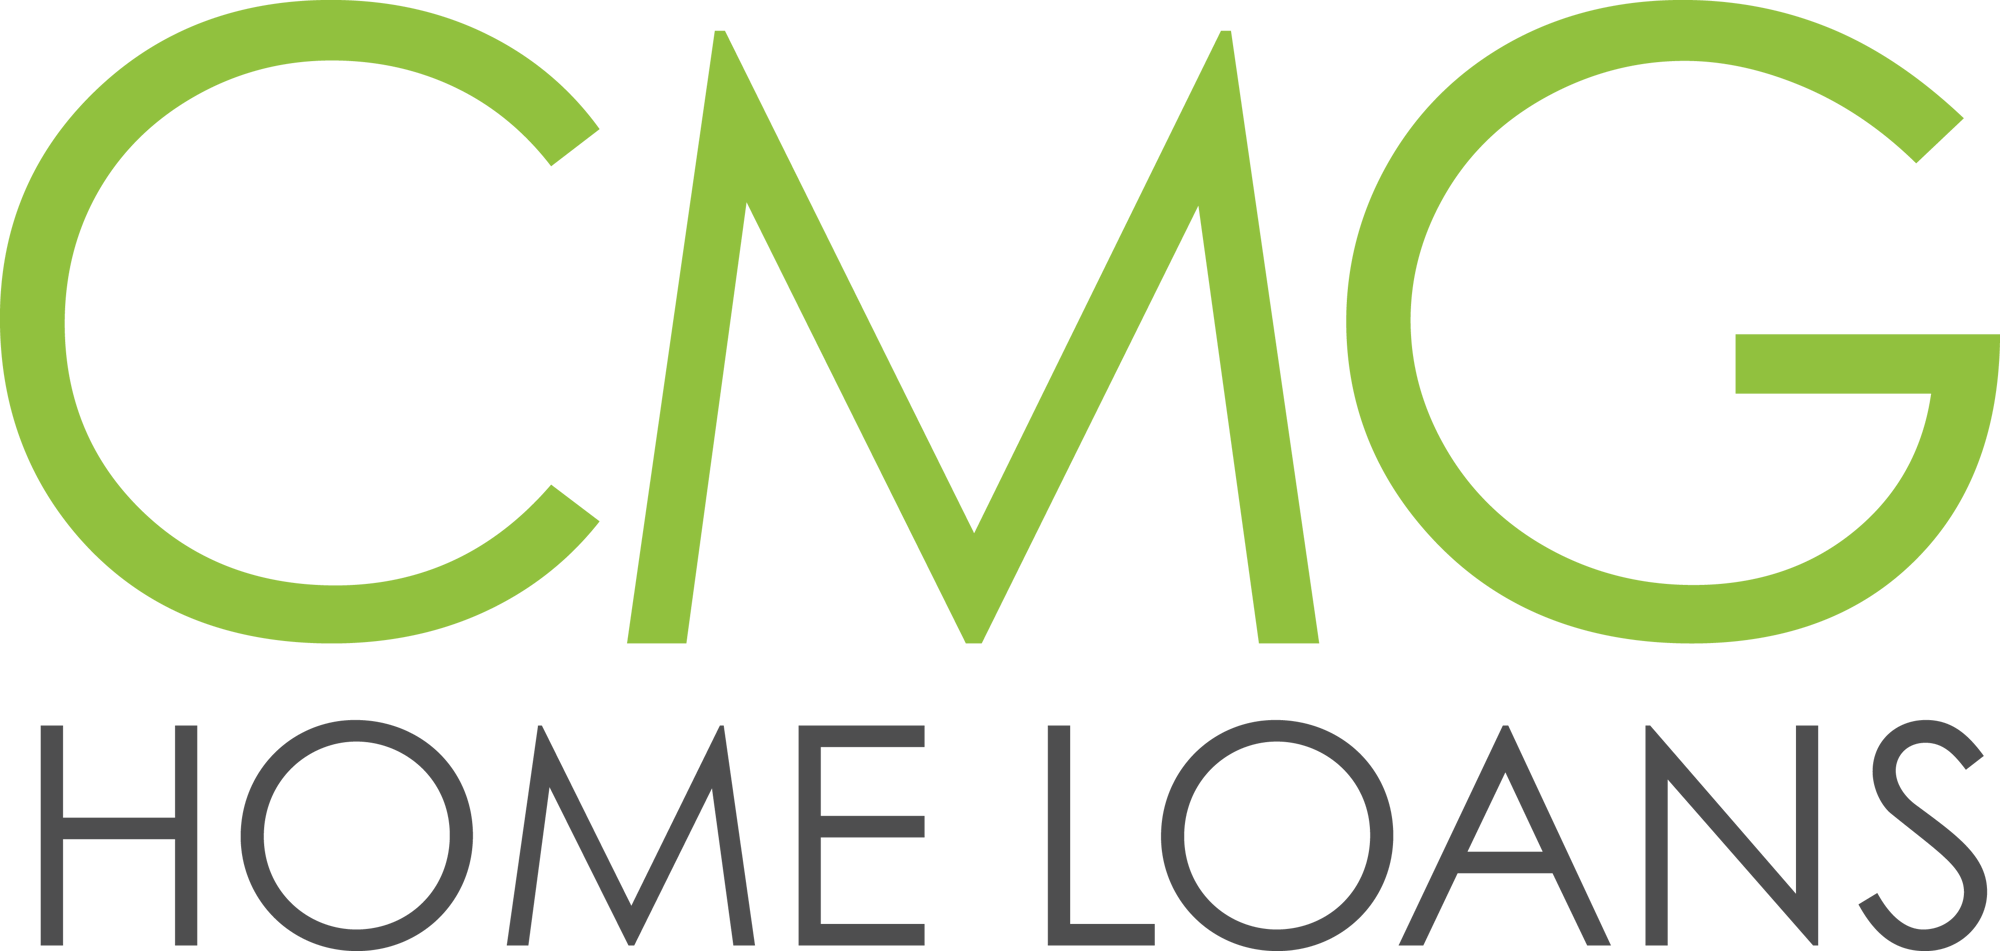 CMG_HOME_LOANS_LOGO_POS_VERTICAL_STACKED_FINAL_2_PNG (1)